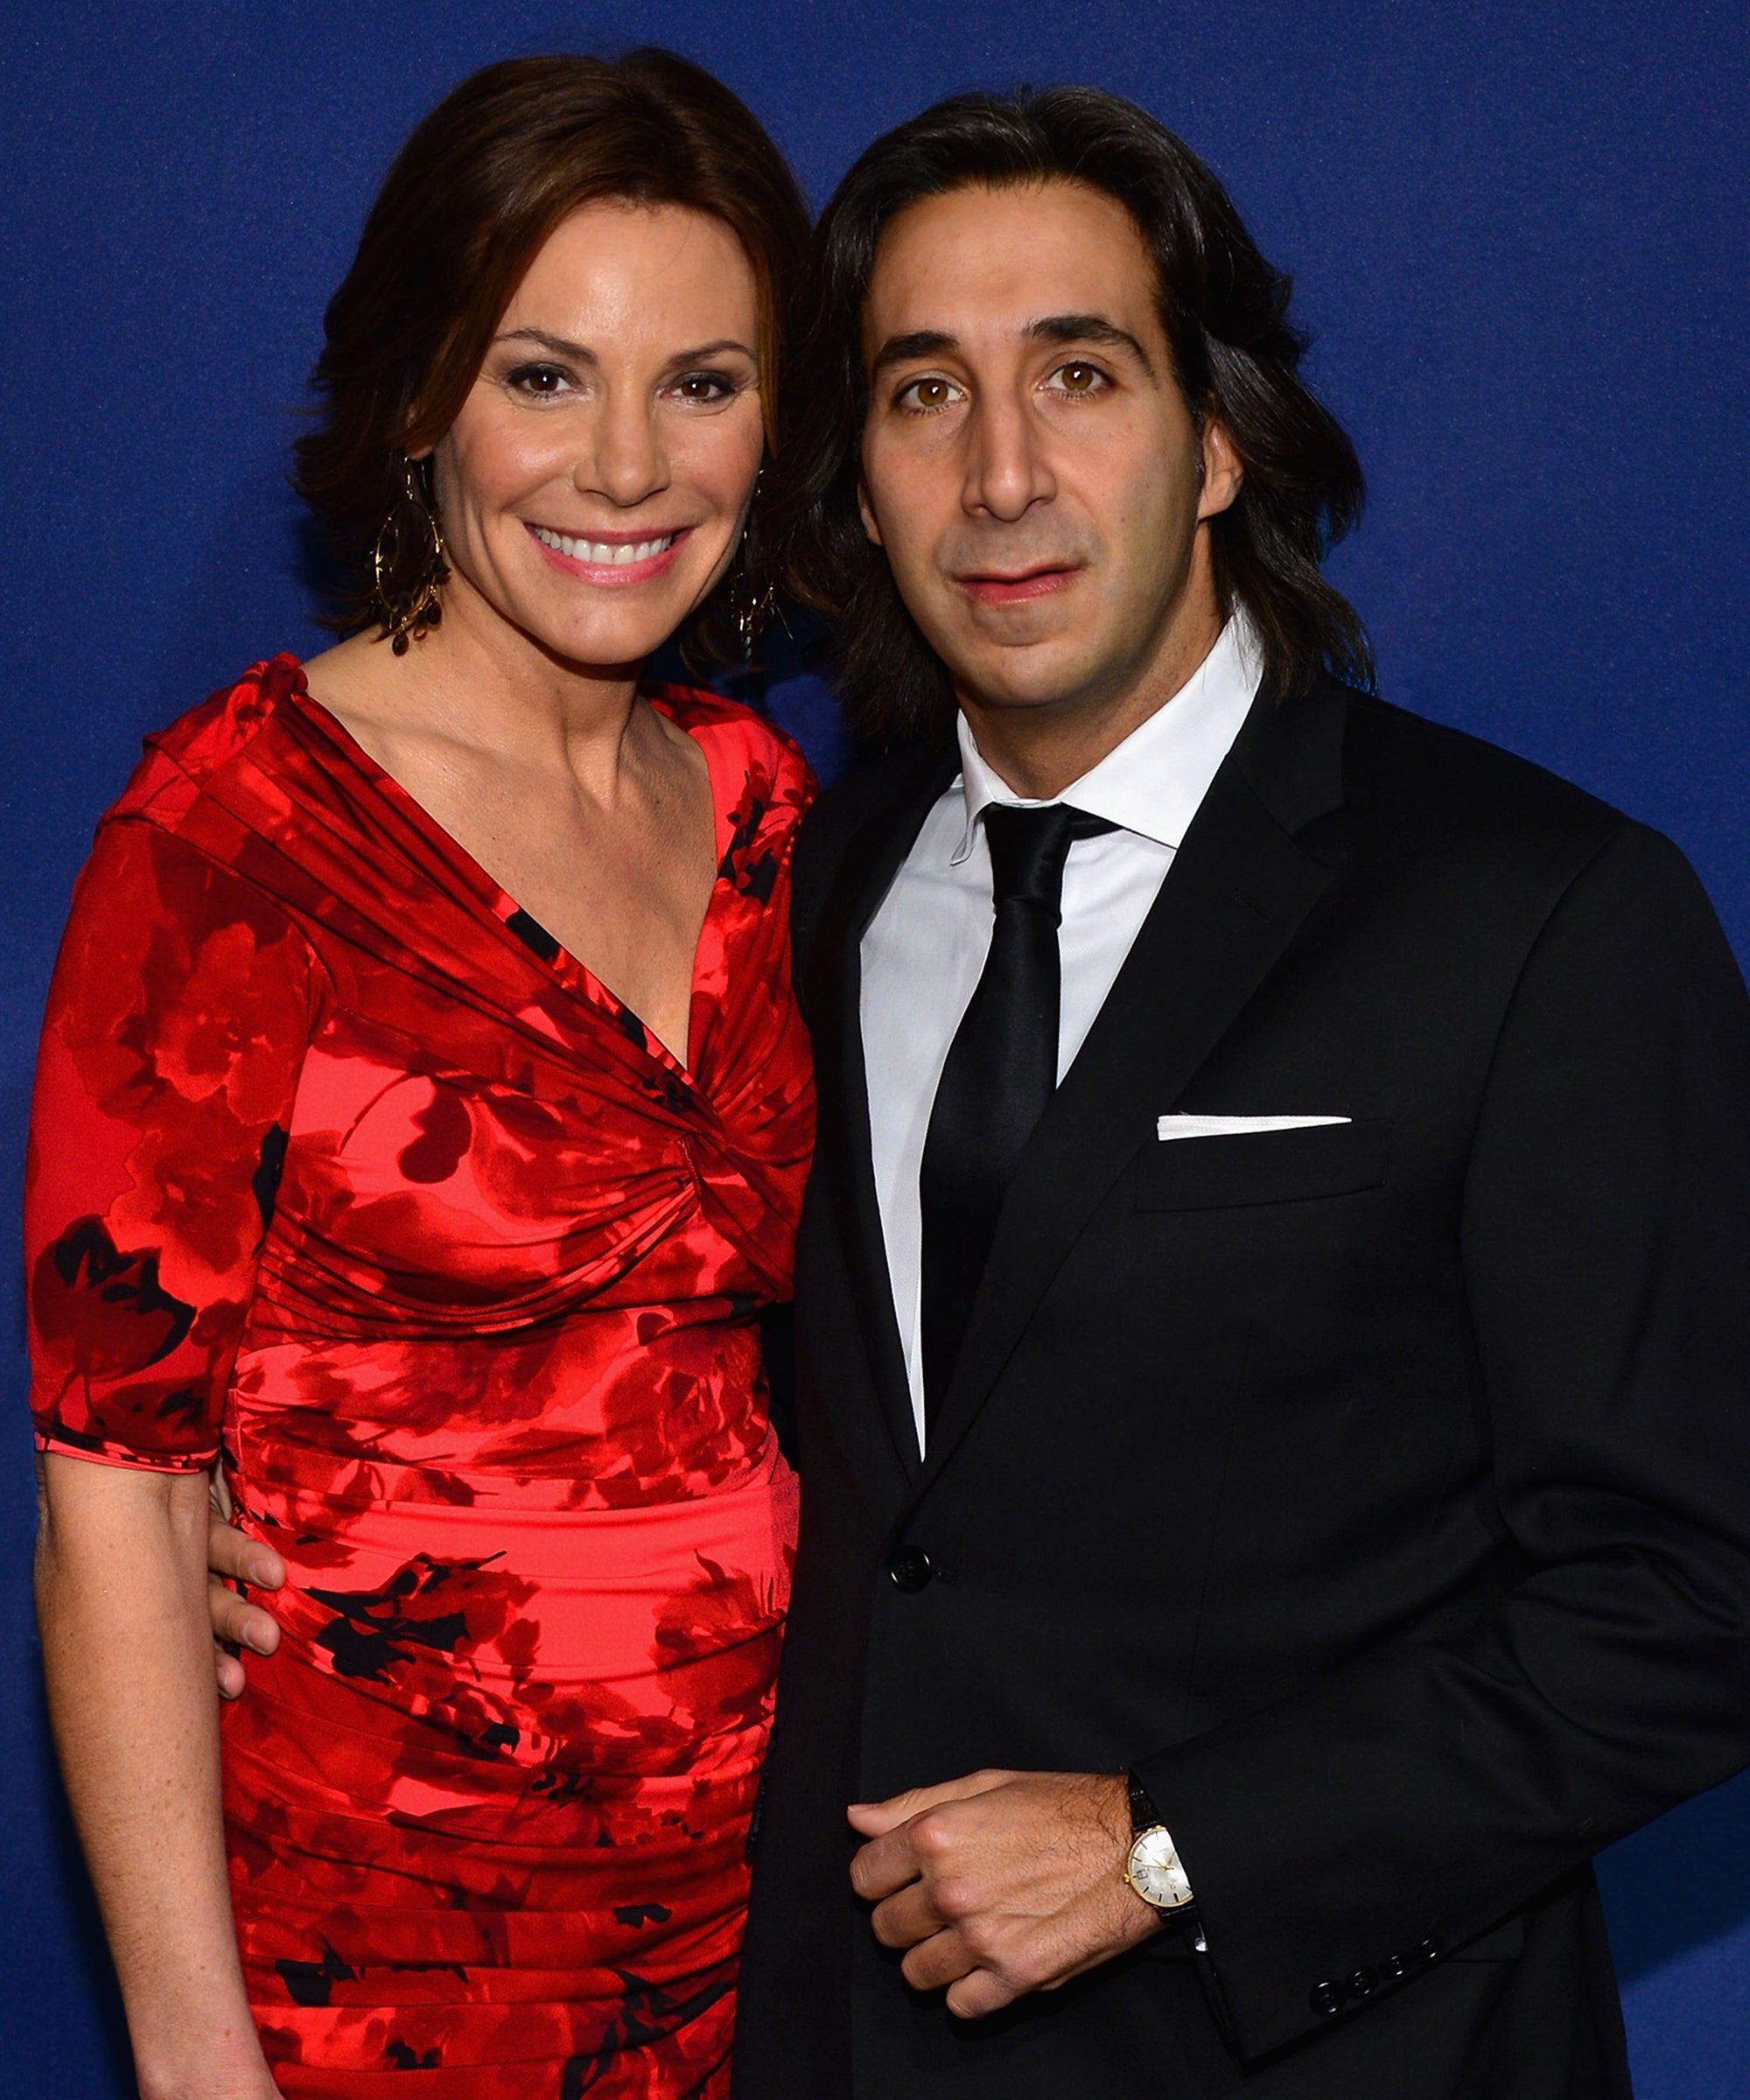 When Did Luann And Jacques Break Up On Real Housewives? image